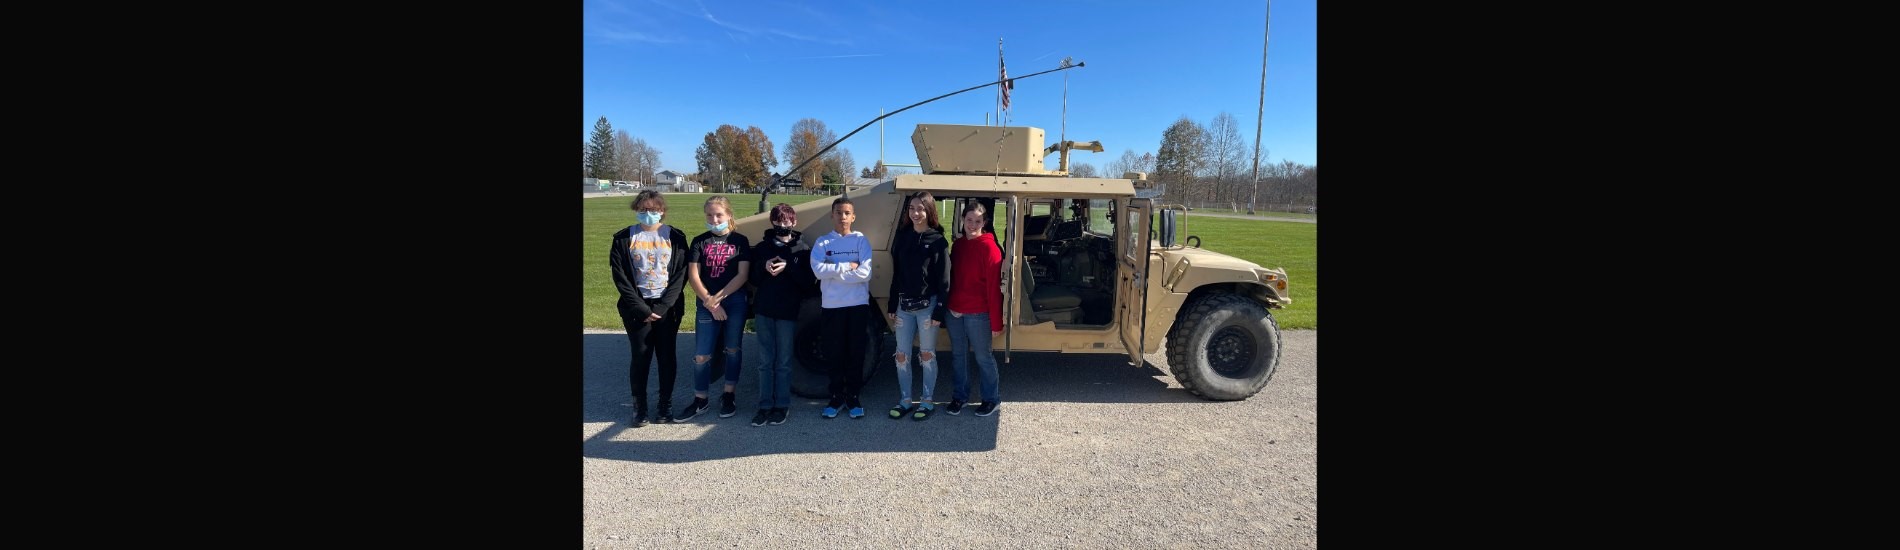 8th graders standing near humvee loaned by the Arsenal